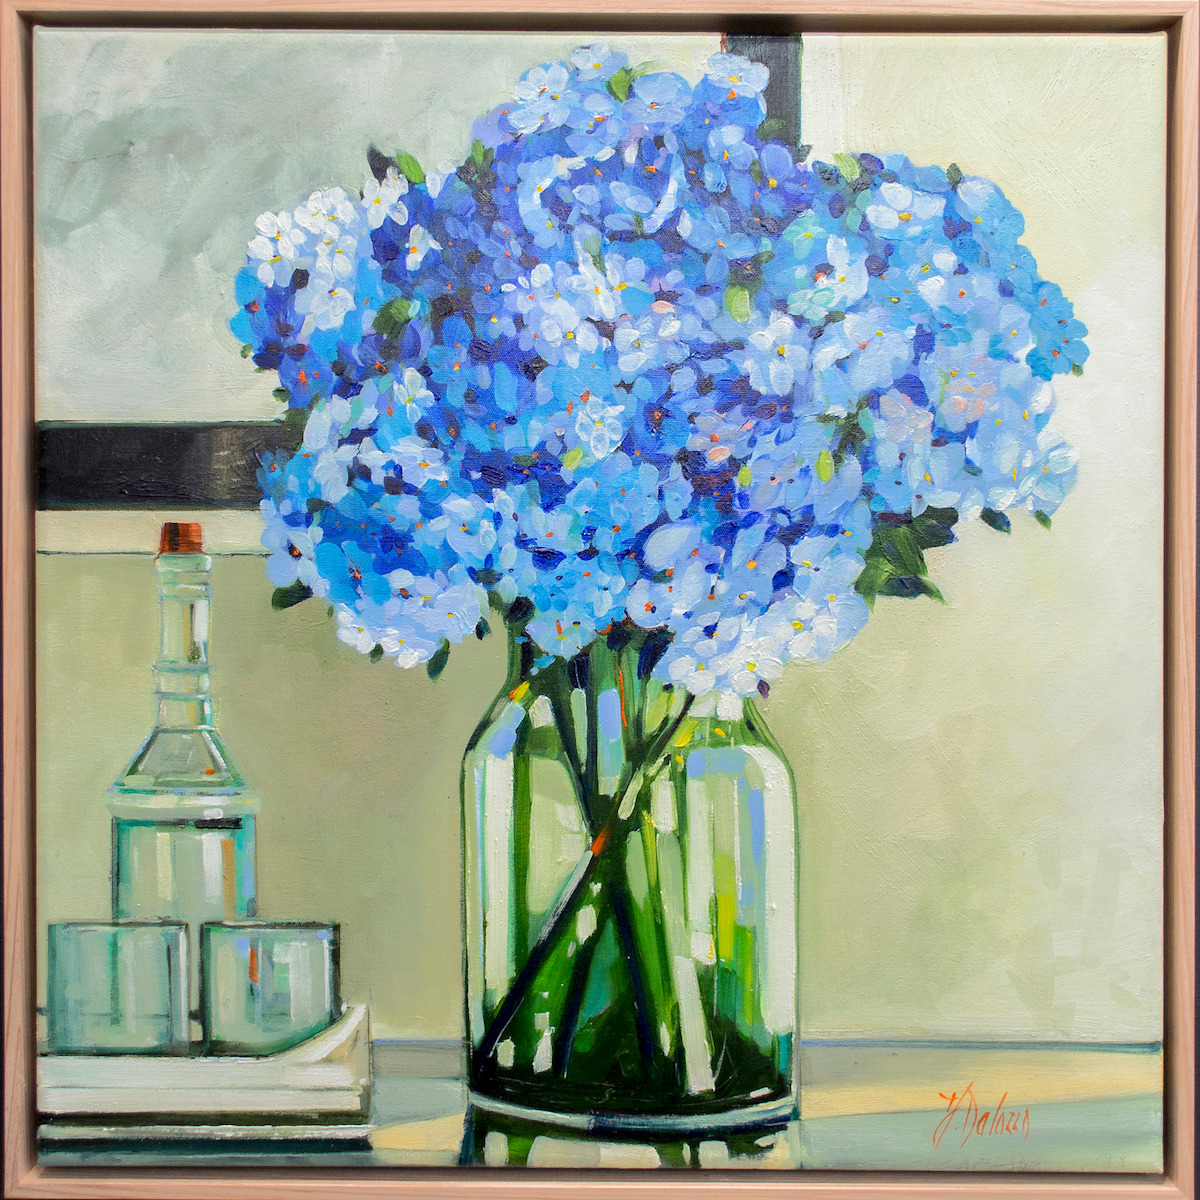 Framed Front View Of Still Life Painting "Something Blue Something New" By Judith Dalozzo